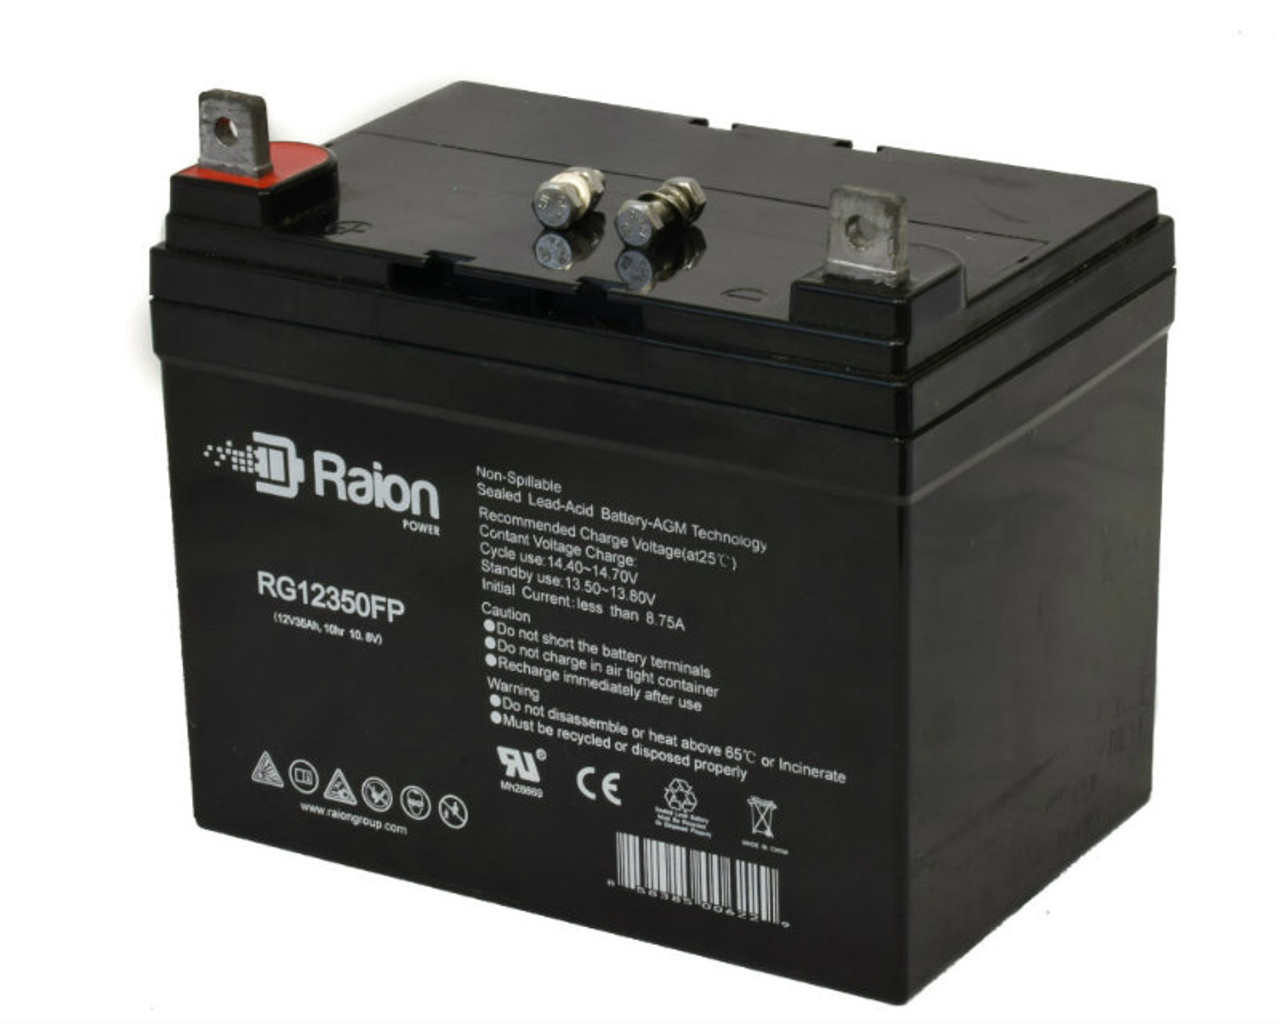 Raion Power Replacement 12V 35Ah Battery for Ihc Cub Garden 129 - 1 Pack